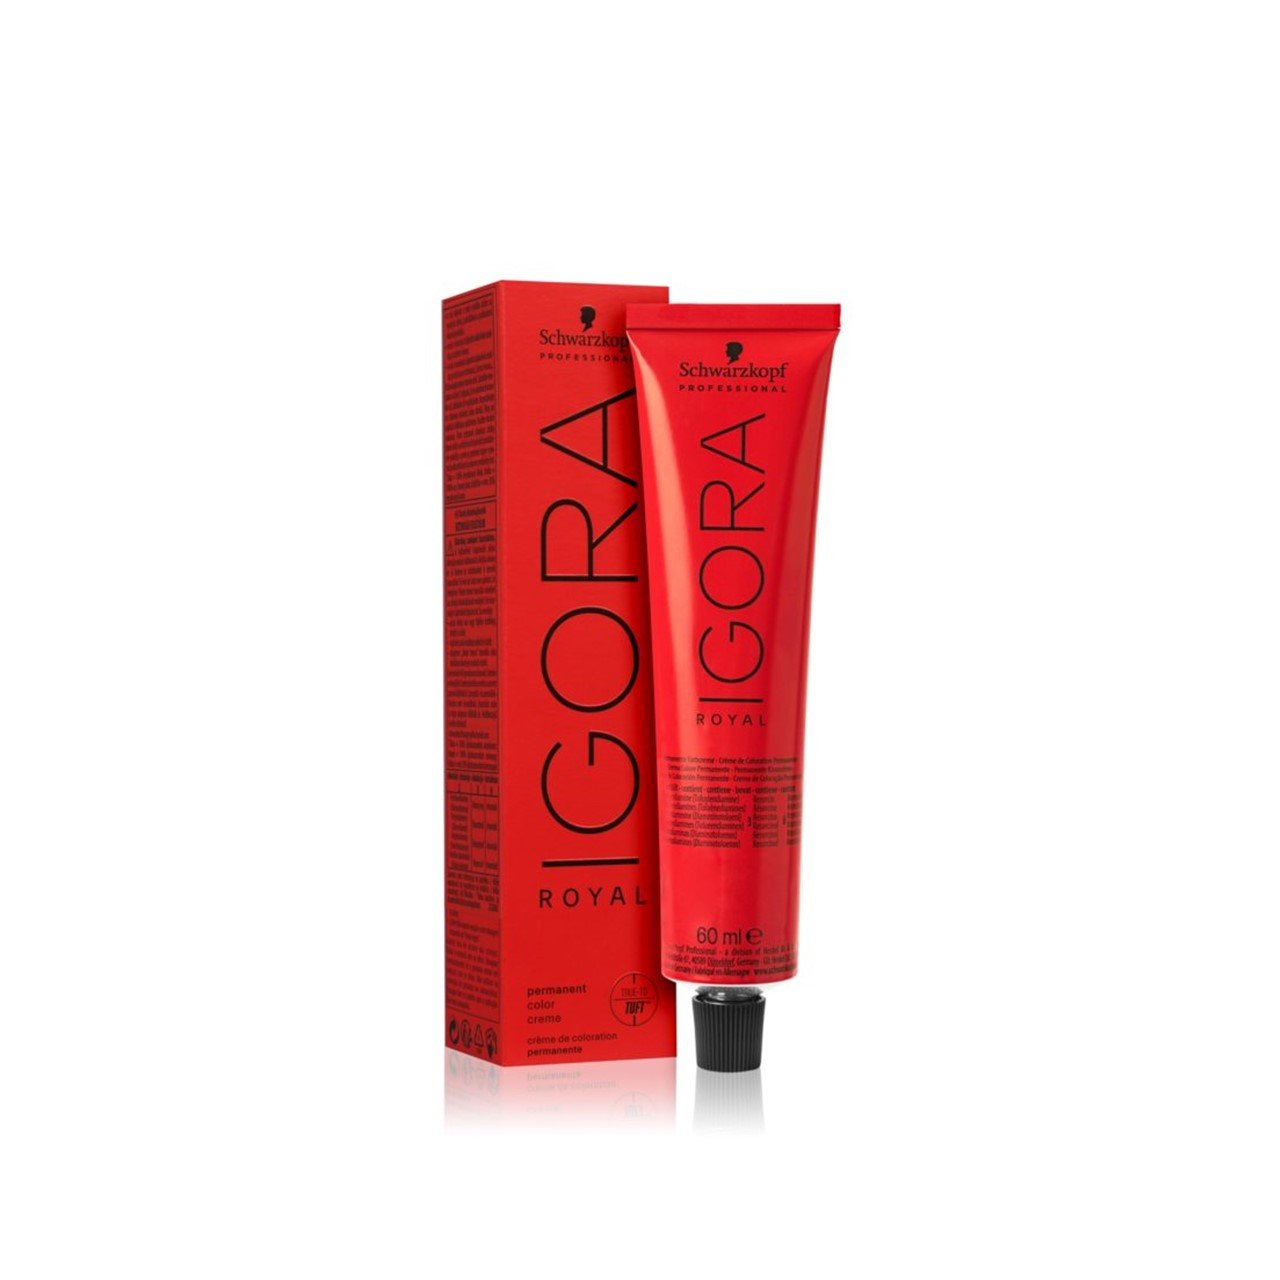 Schwarzkopf Igora Royal Permanent Hair Color 0-89 Red Violet Concentrate 60ml